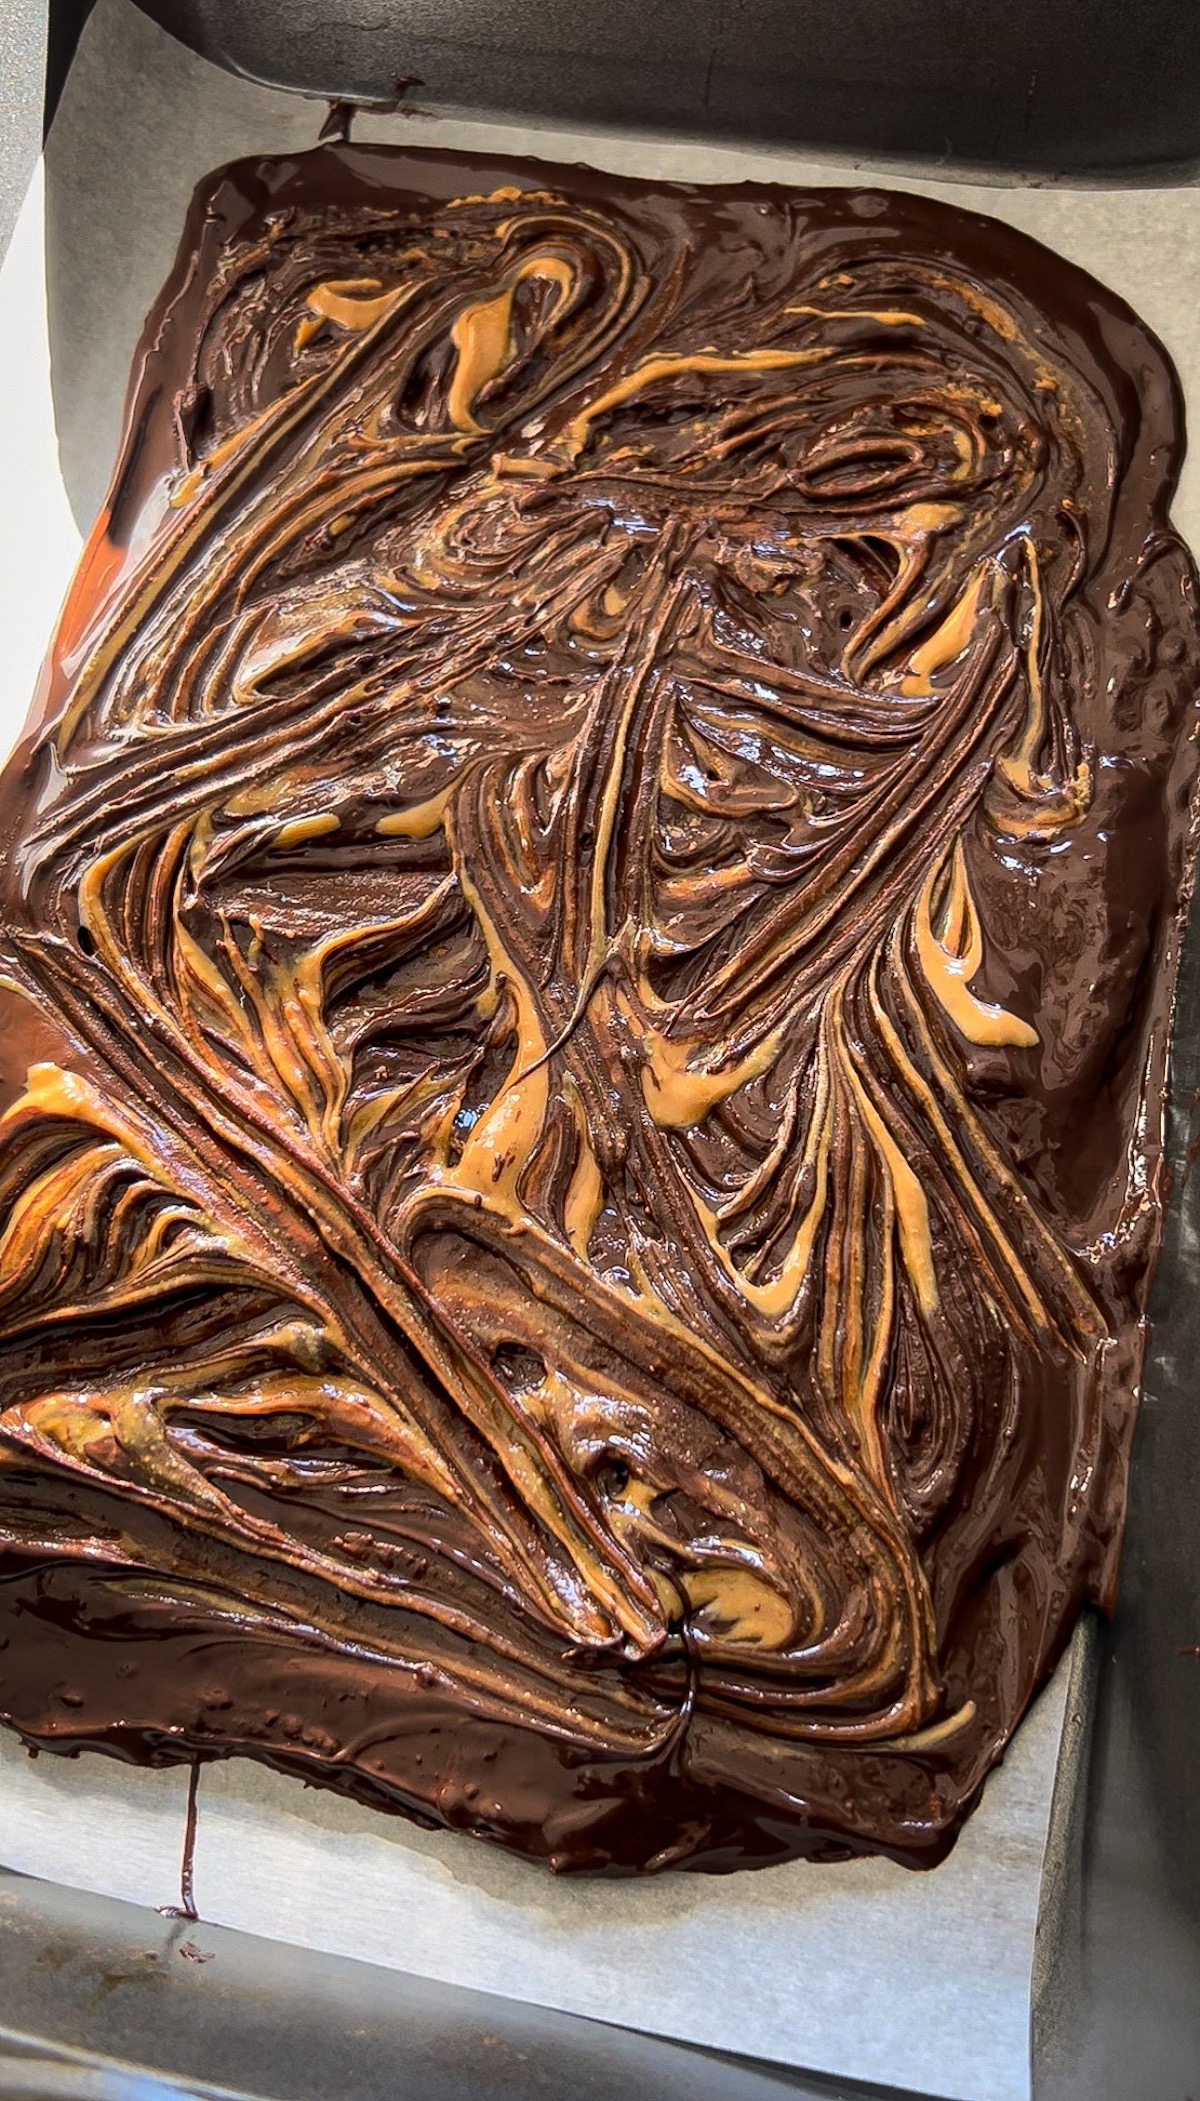 peanut butter swirled through melted chocolate in a marbled pattern